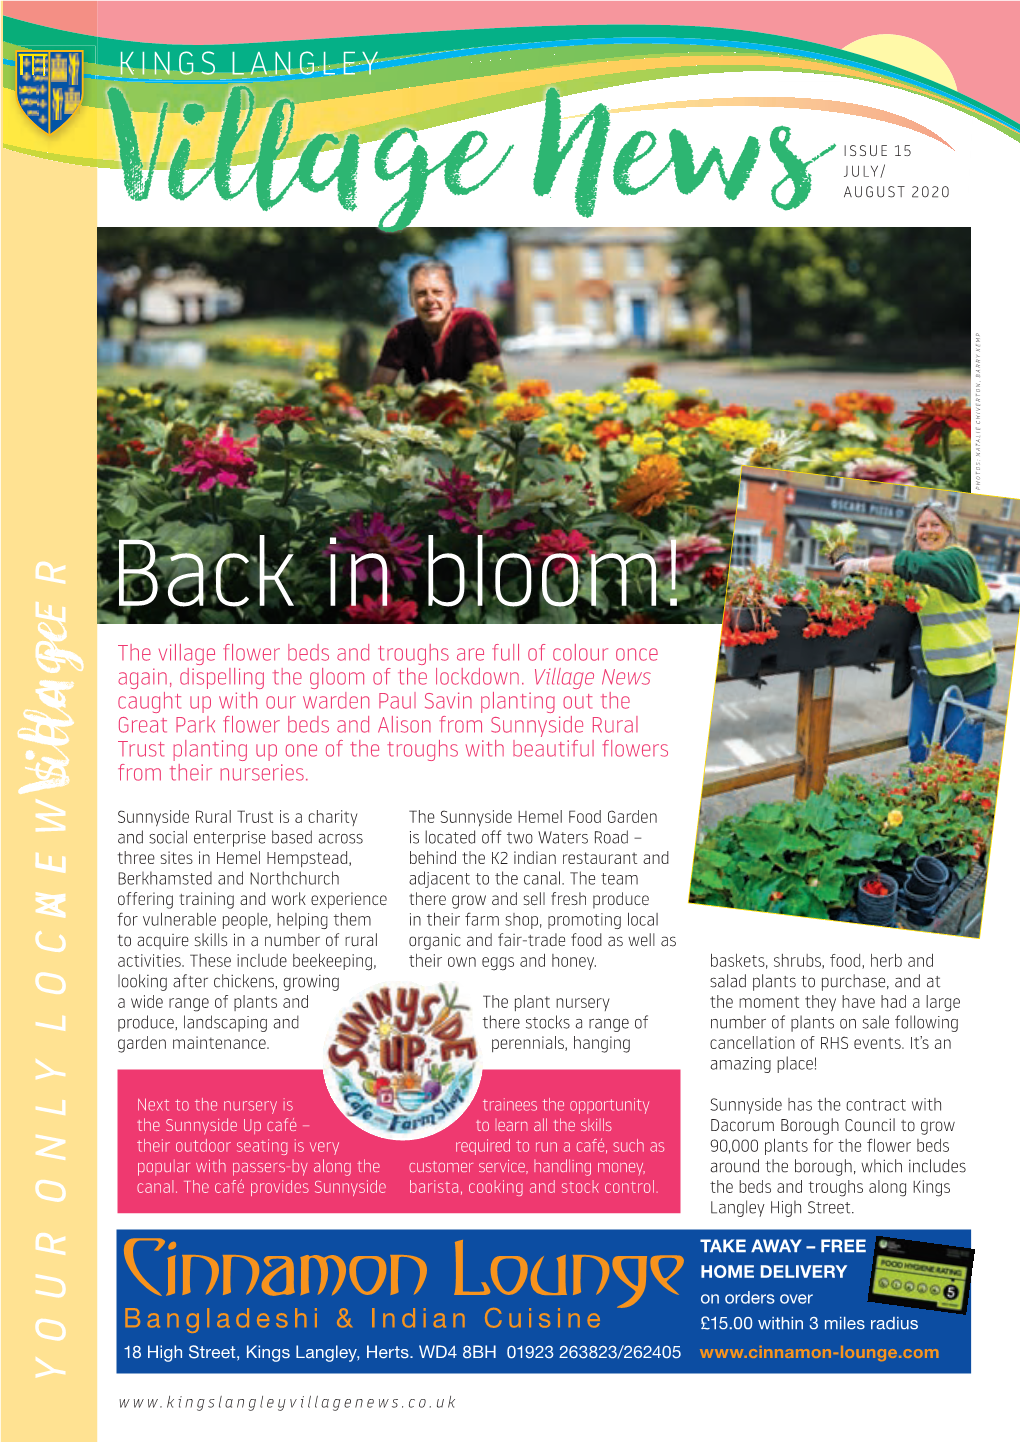 Back in Bloom! the Village Flower Beds and Troughs Are Full of Colour Once Again, Dispelling the Gloom of the Lockdown